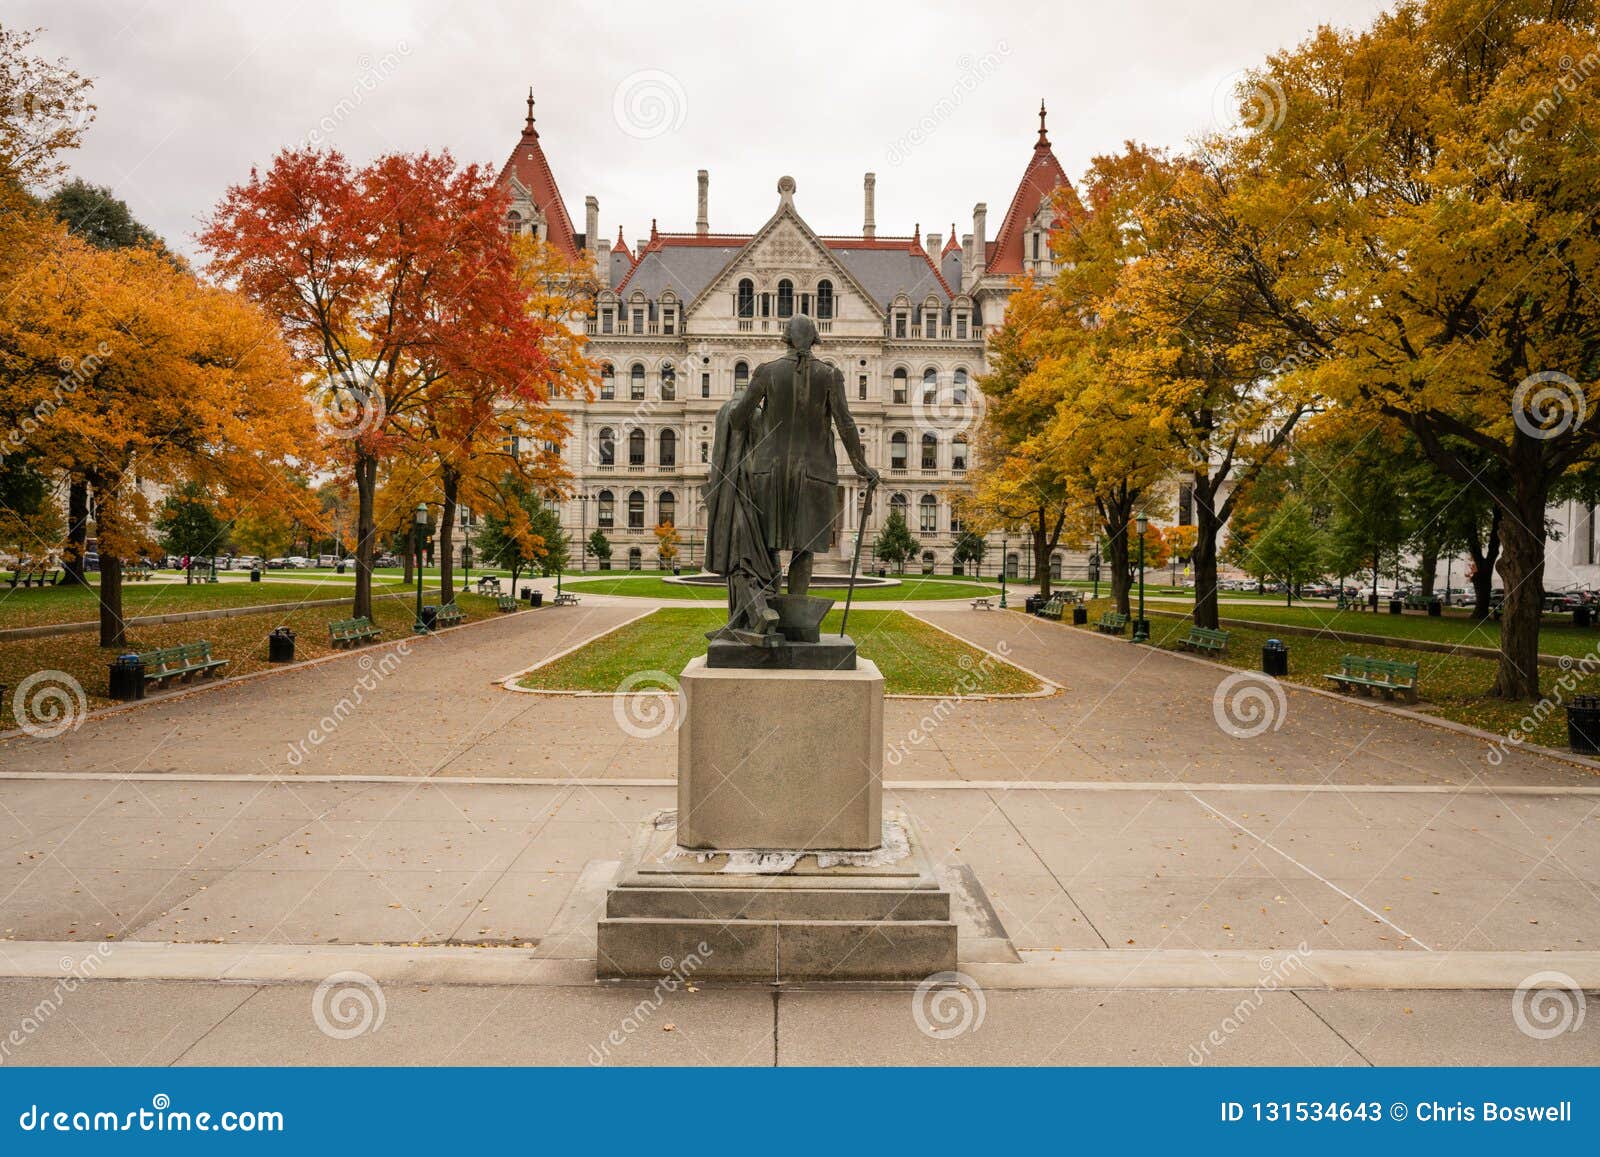 fall season new york statehouse capitol building in albany